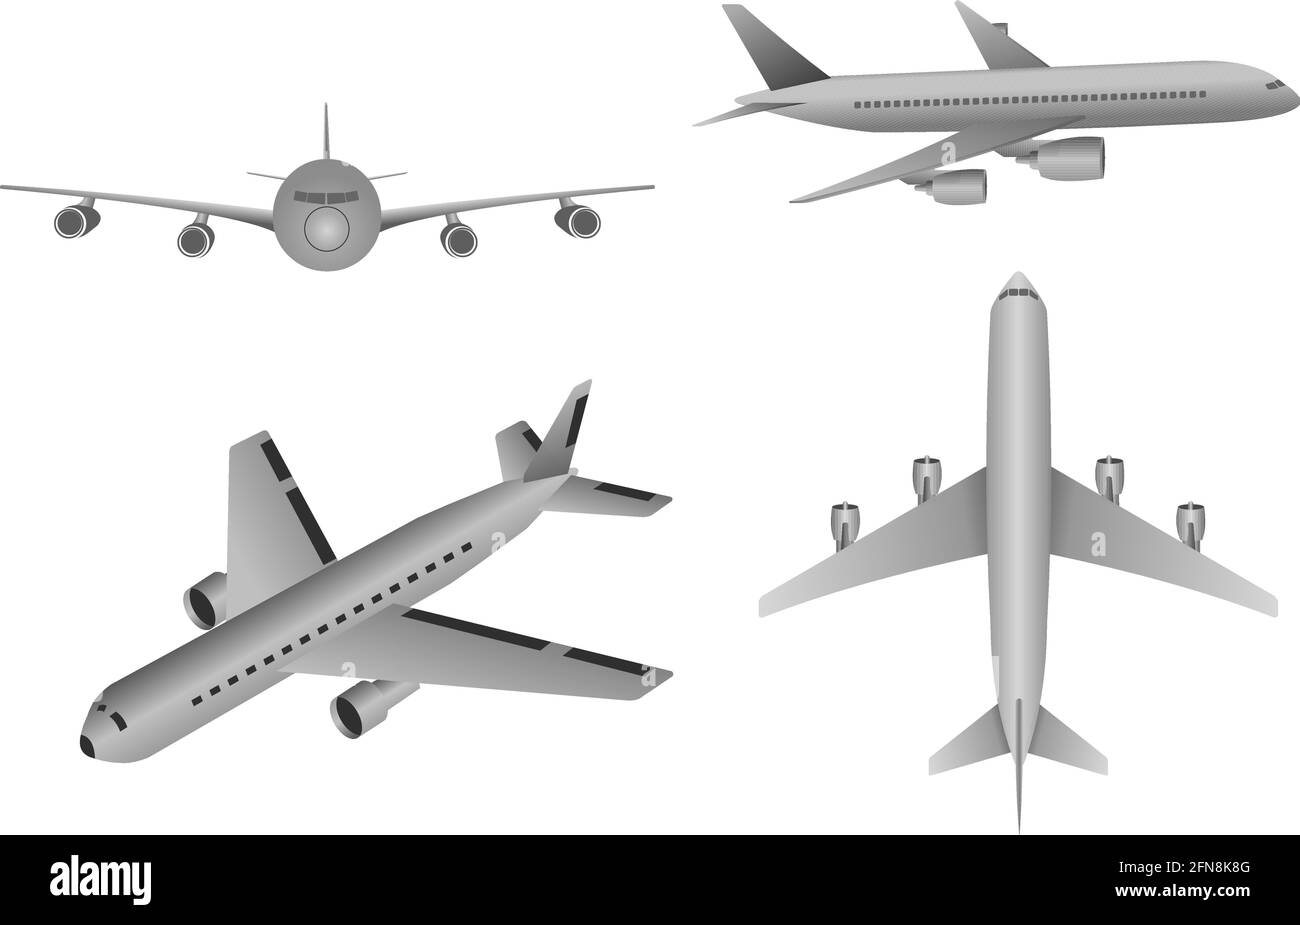 vector of airplane from different angle, isolated on white background. Stock Vector